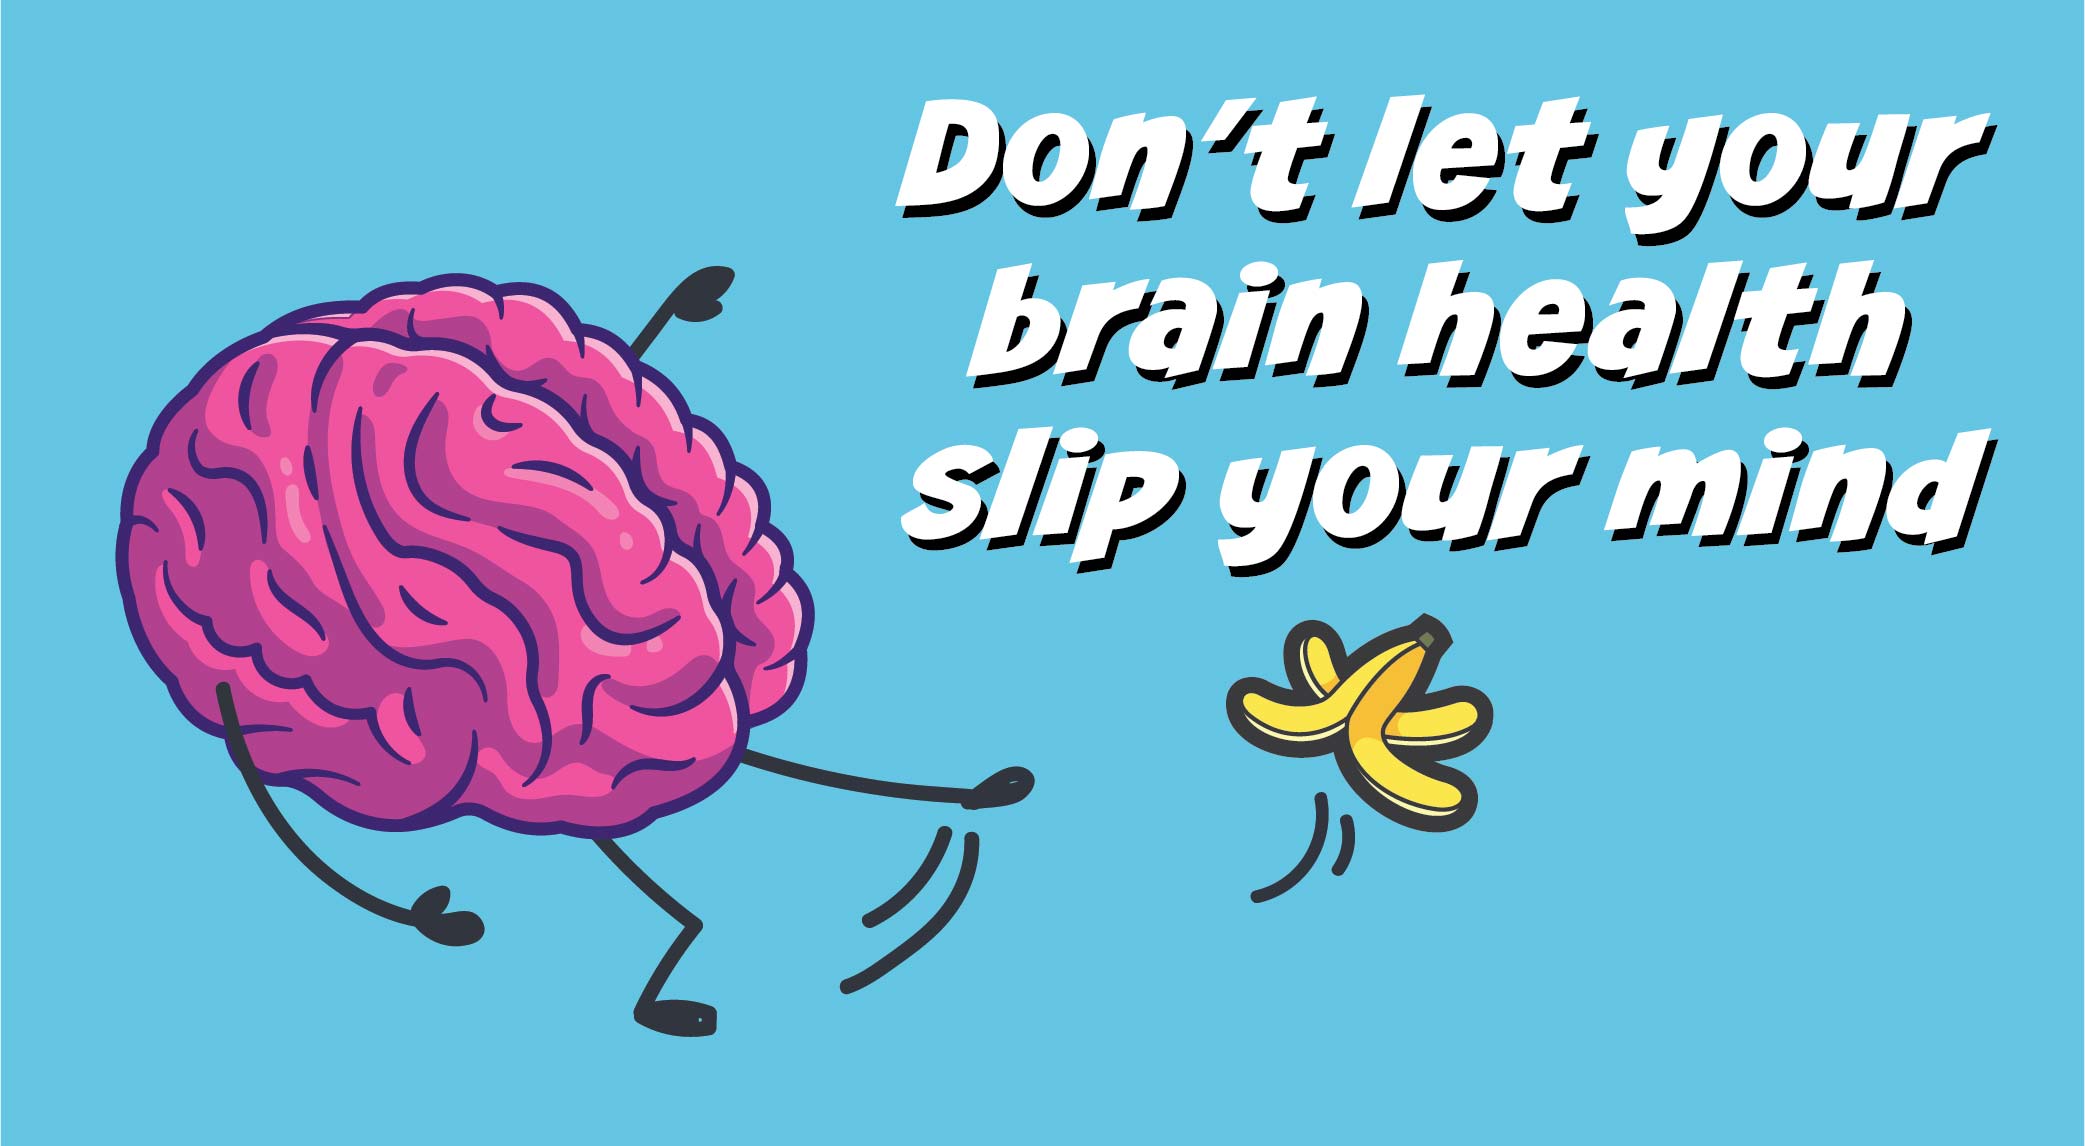 Don't let your brain health slip your mind.